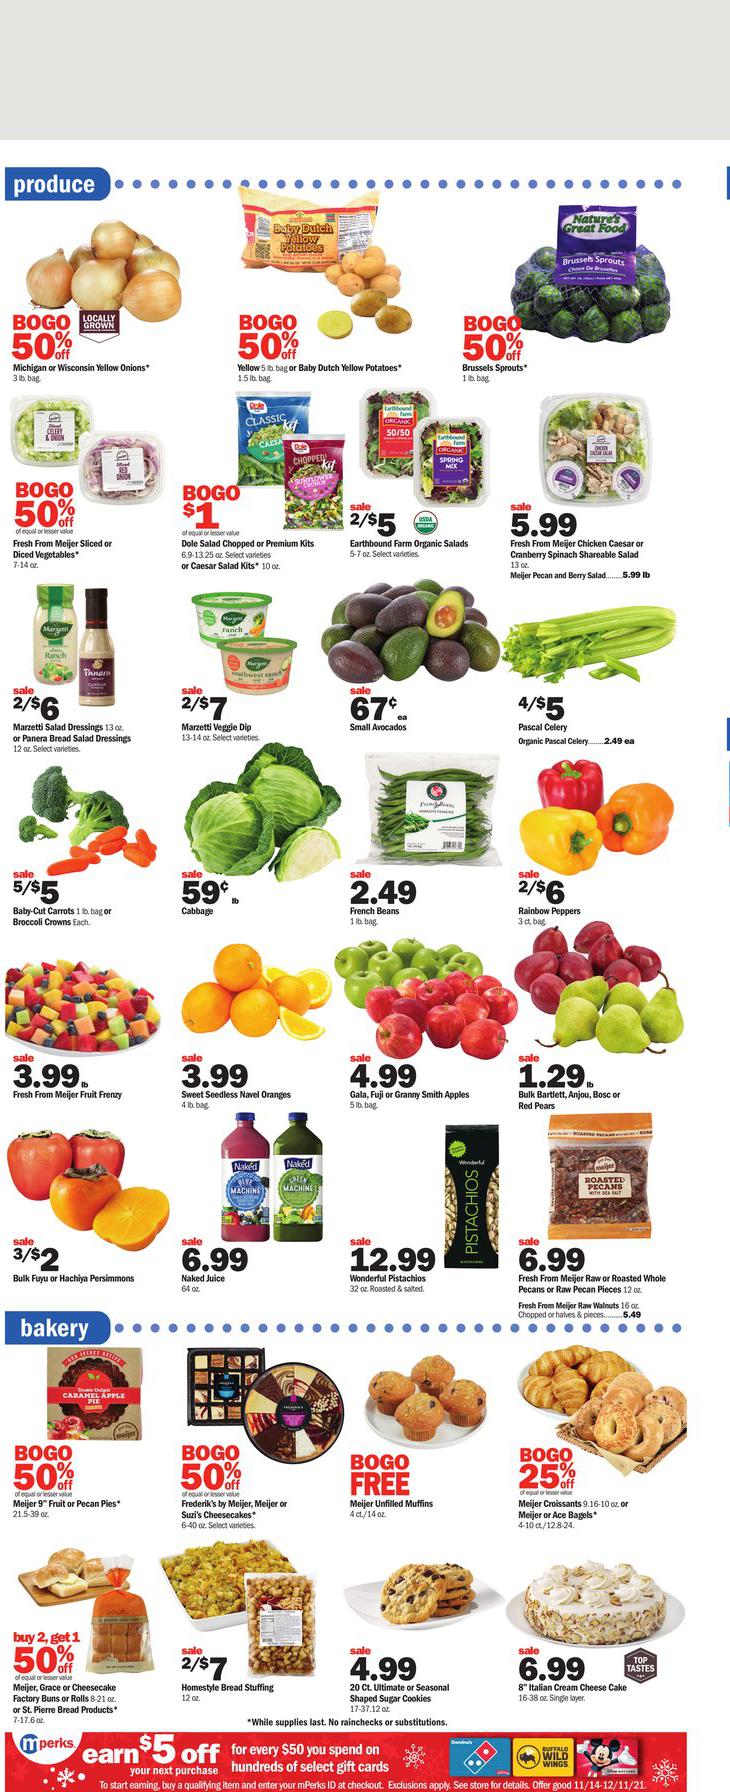 21.11.2021 Meijer ad 3. page